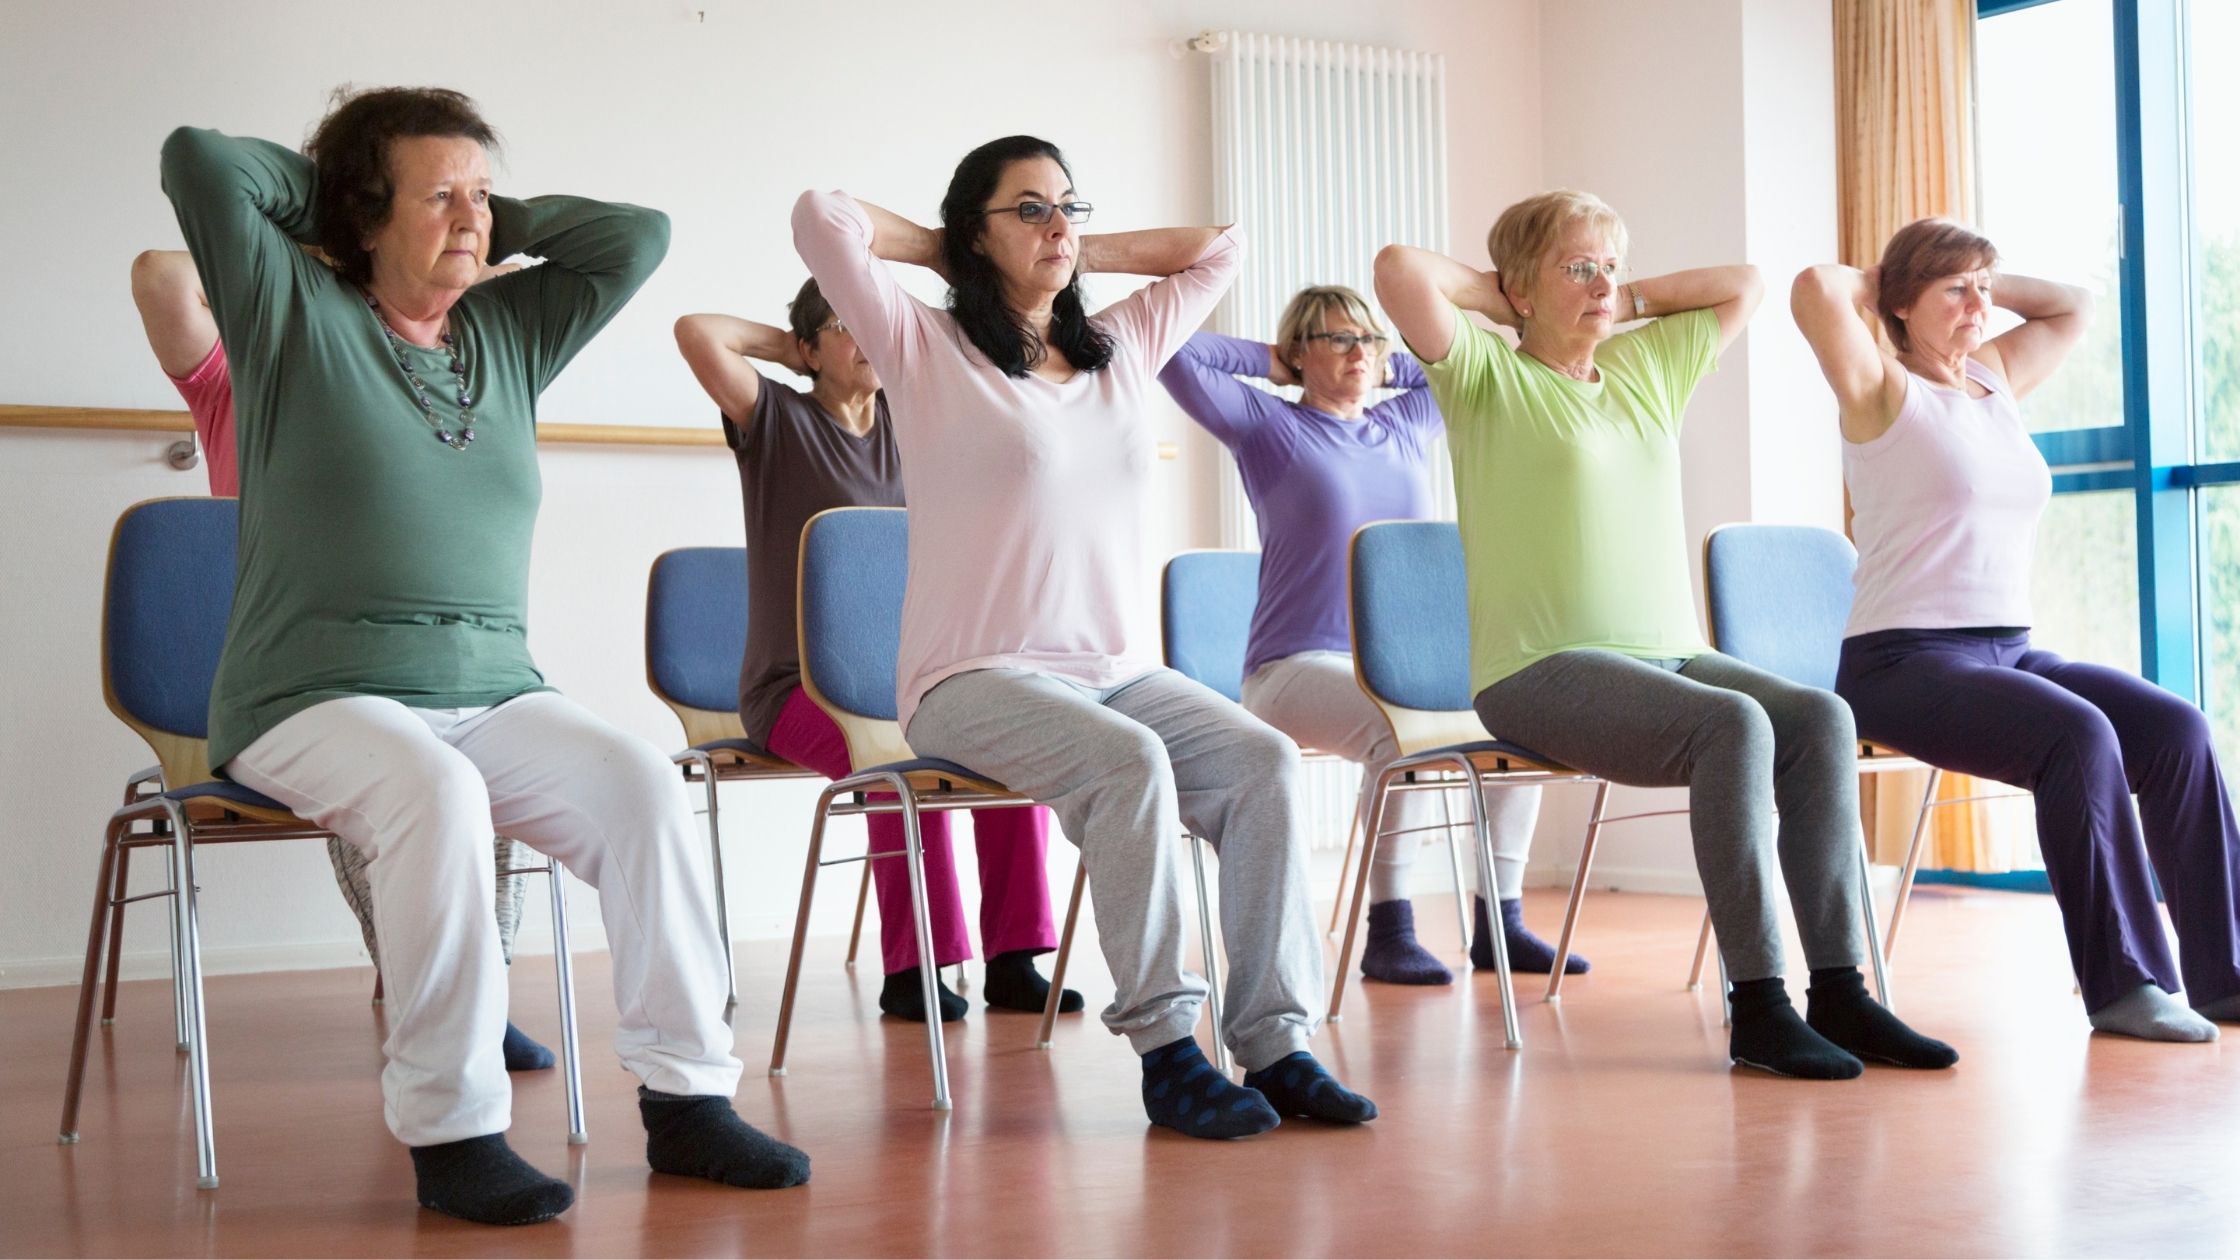 Chair Yoga For Seniors: Making Yoga Safe And Accessible To People Of All  Ages And Abilities - Peterborough